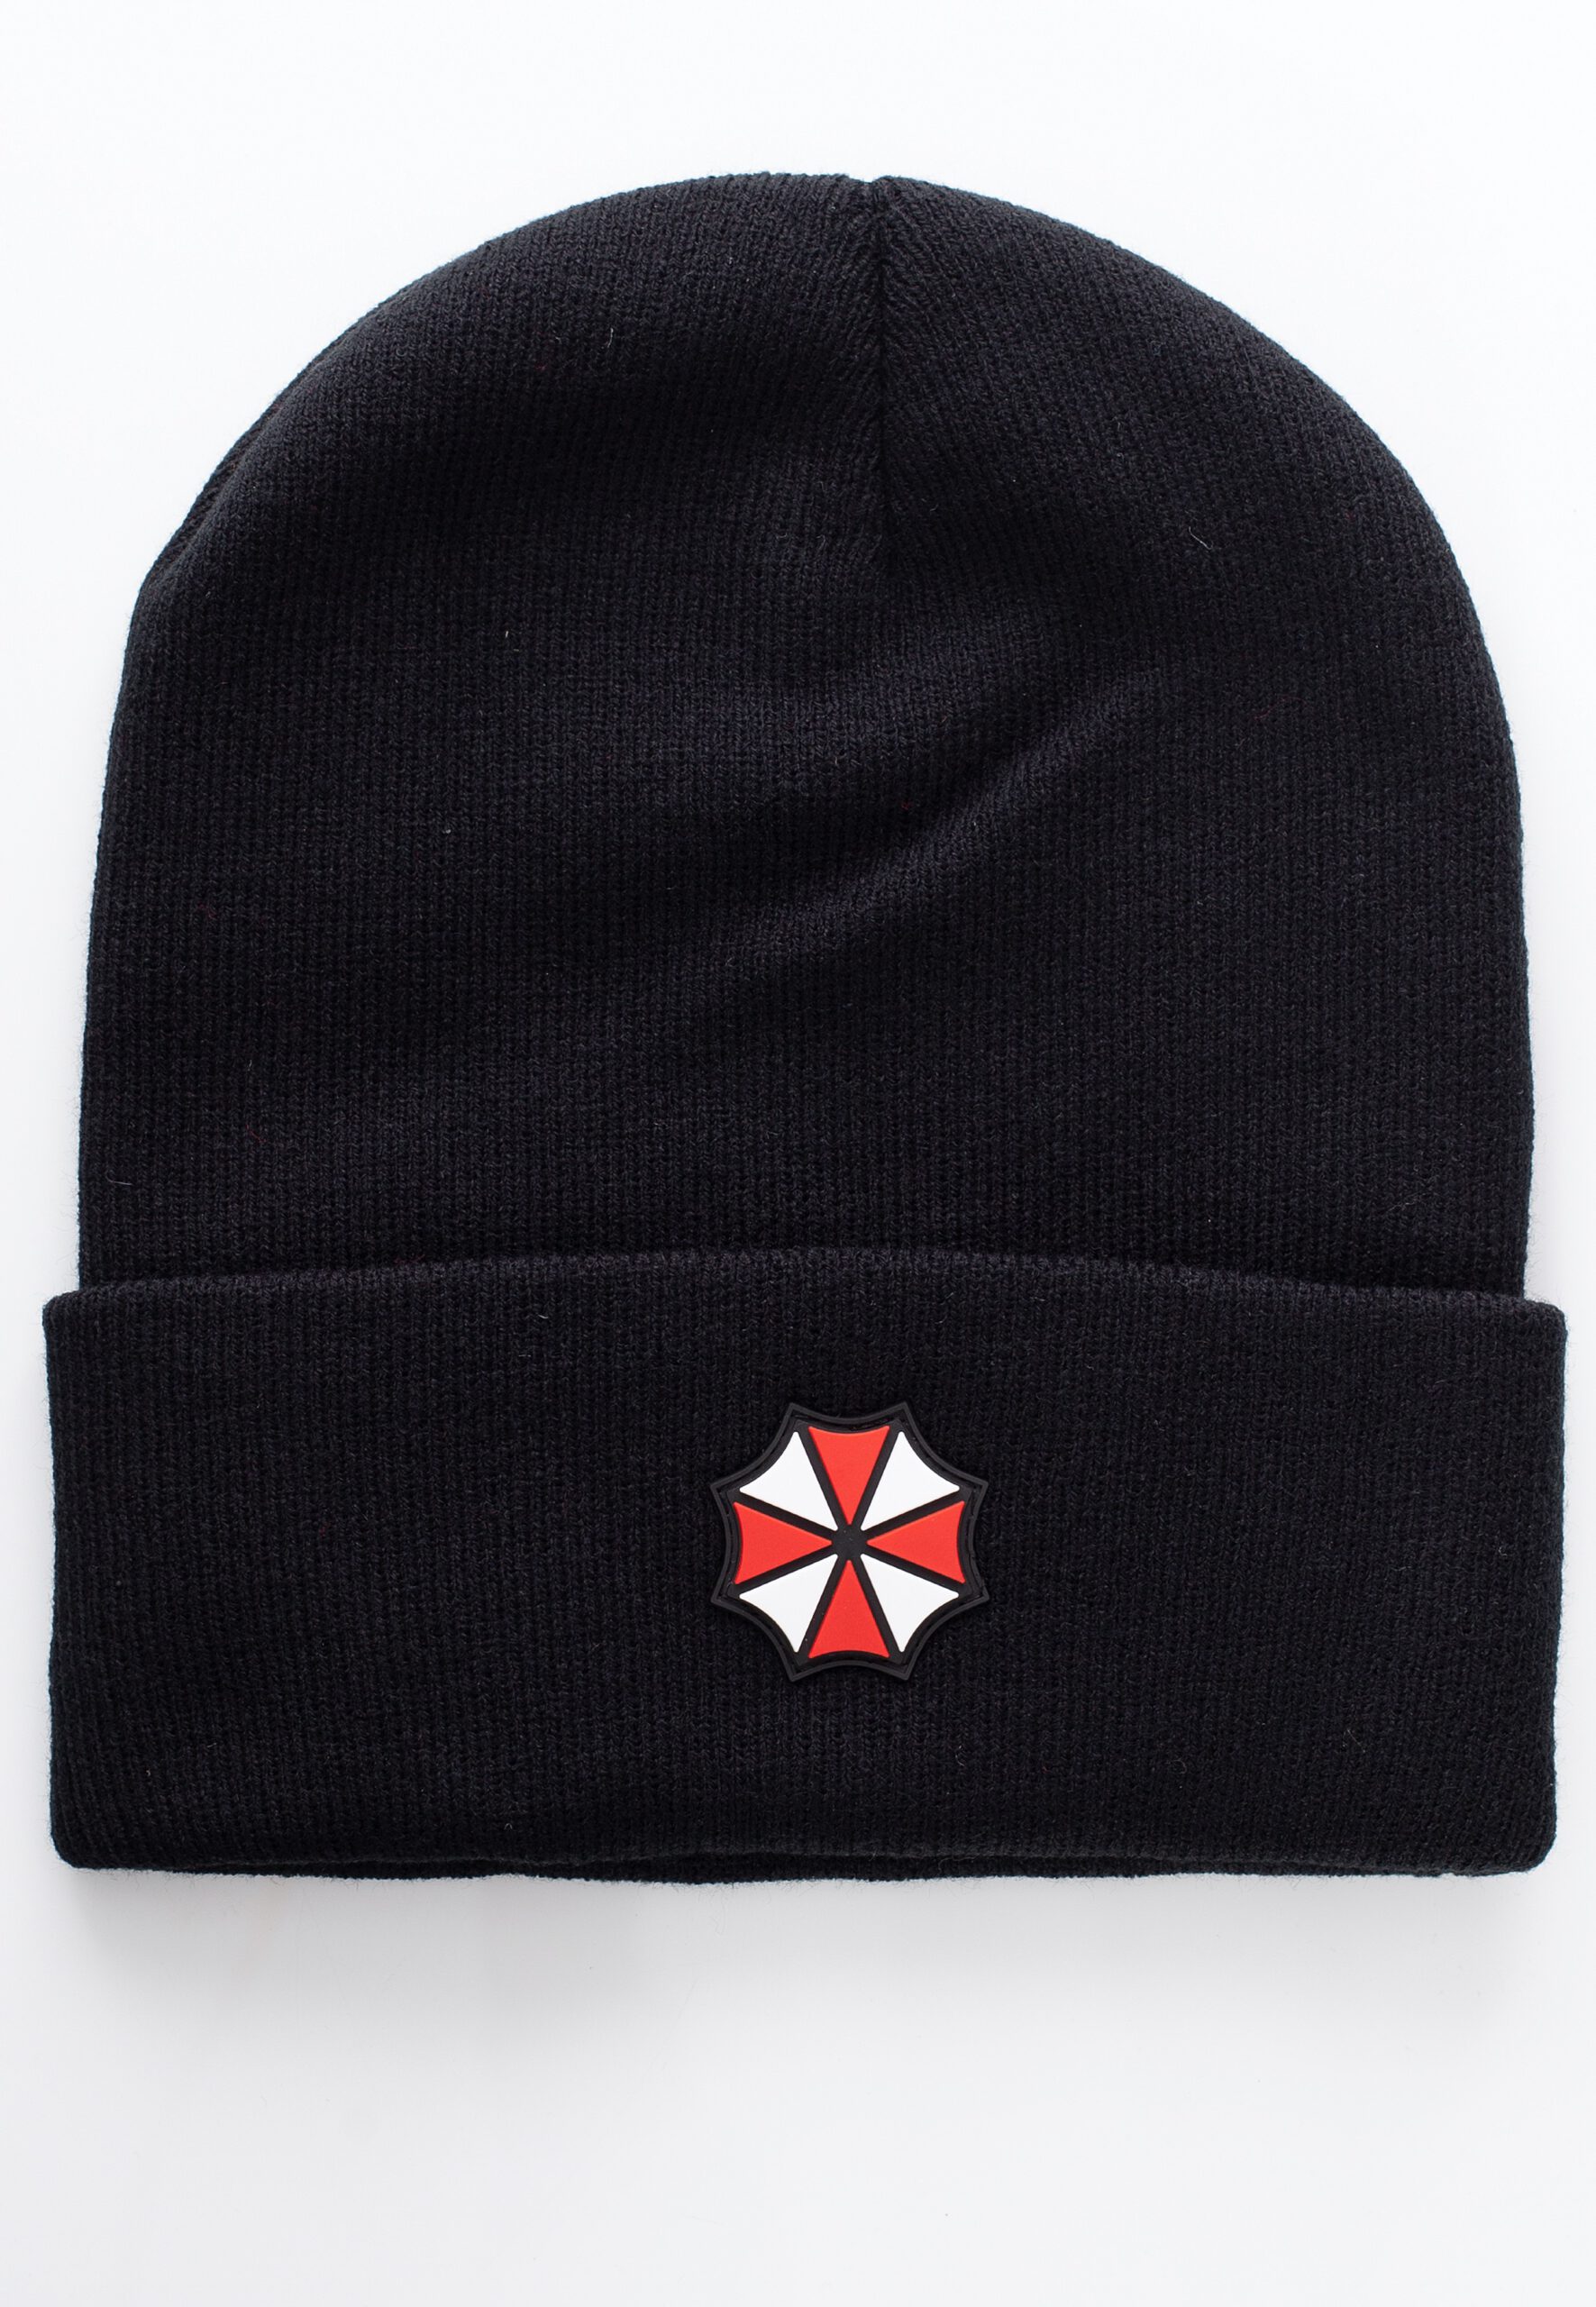 Resident Evil - Title Embroidery - Beanies